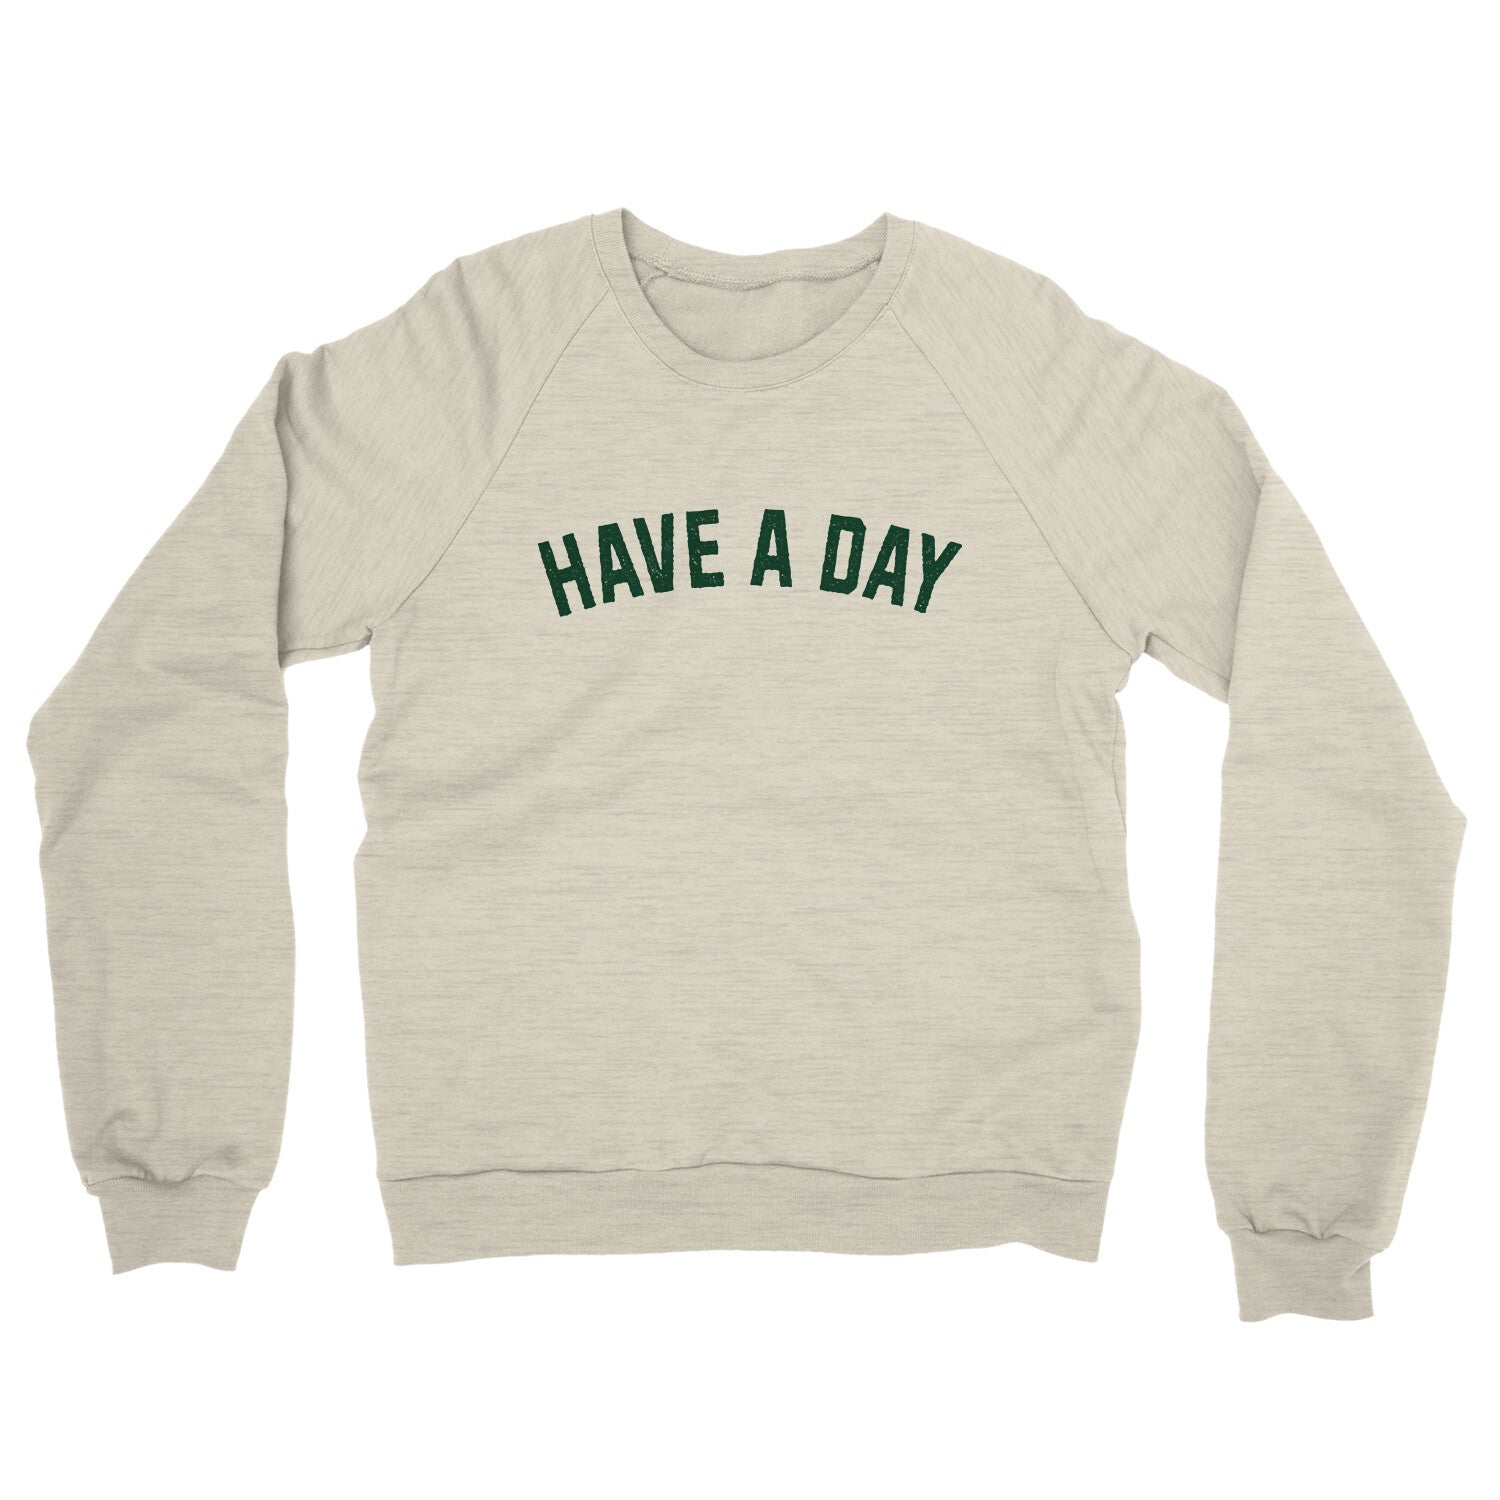 Have a Day in Heather Oatmeal Color